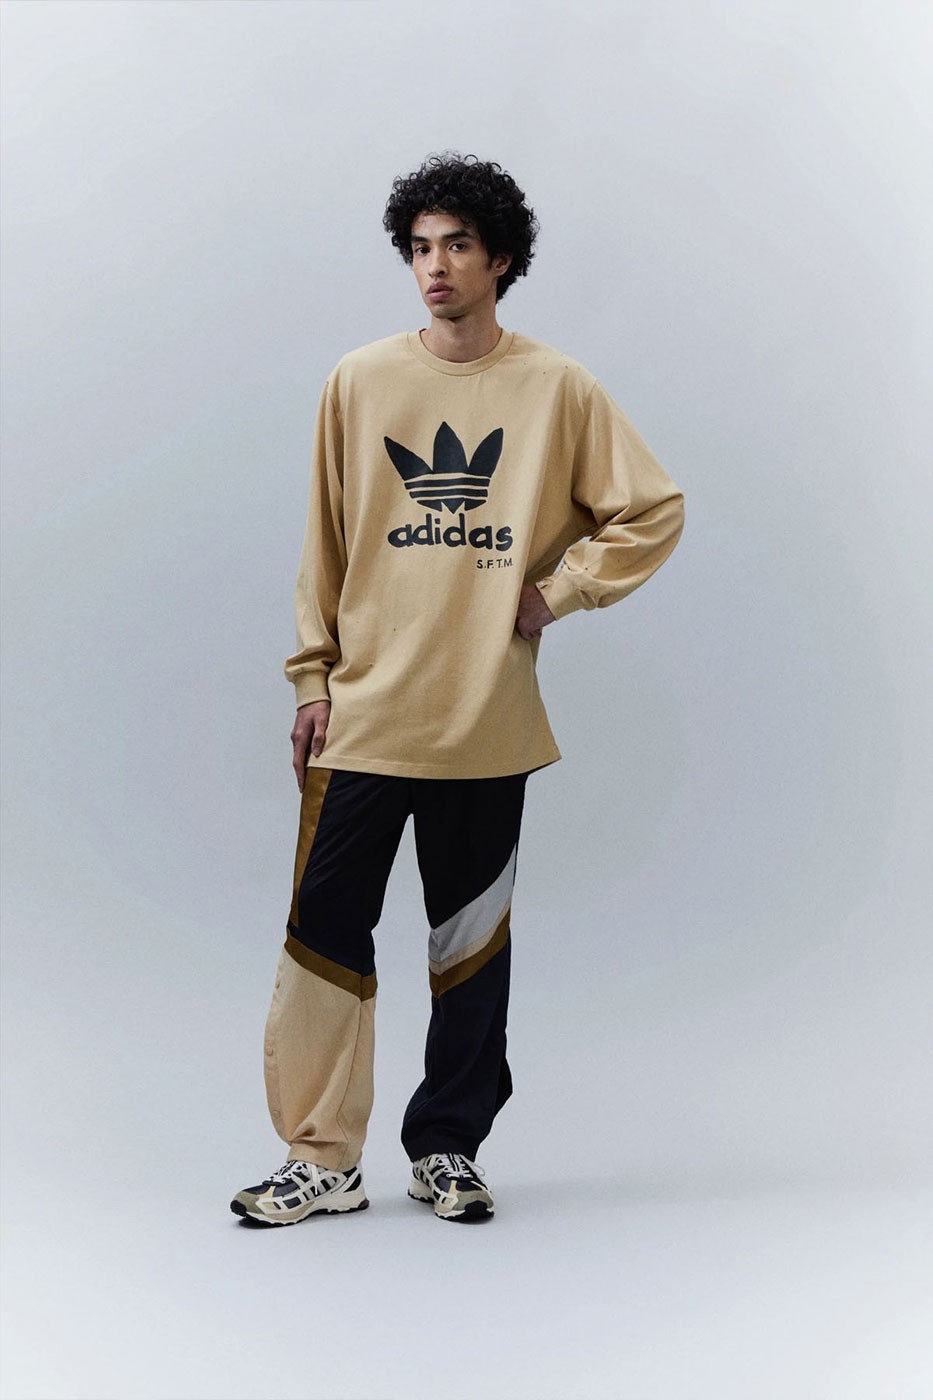 Trouwens Amerika Door Song for the Mute Debut Adidas Originals Collaboration – PAUSE Online |  Men's Fashion, Street Style, Fashion News & Streetwear